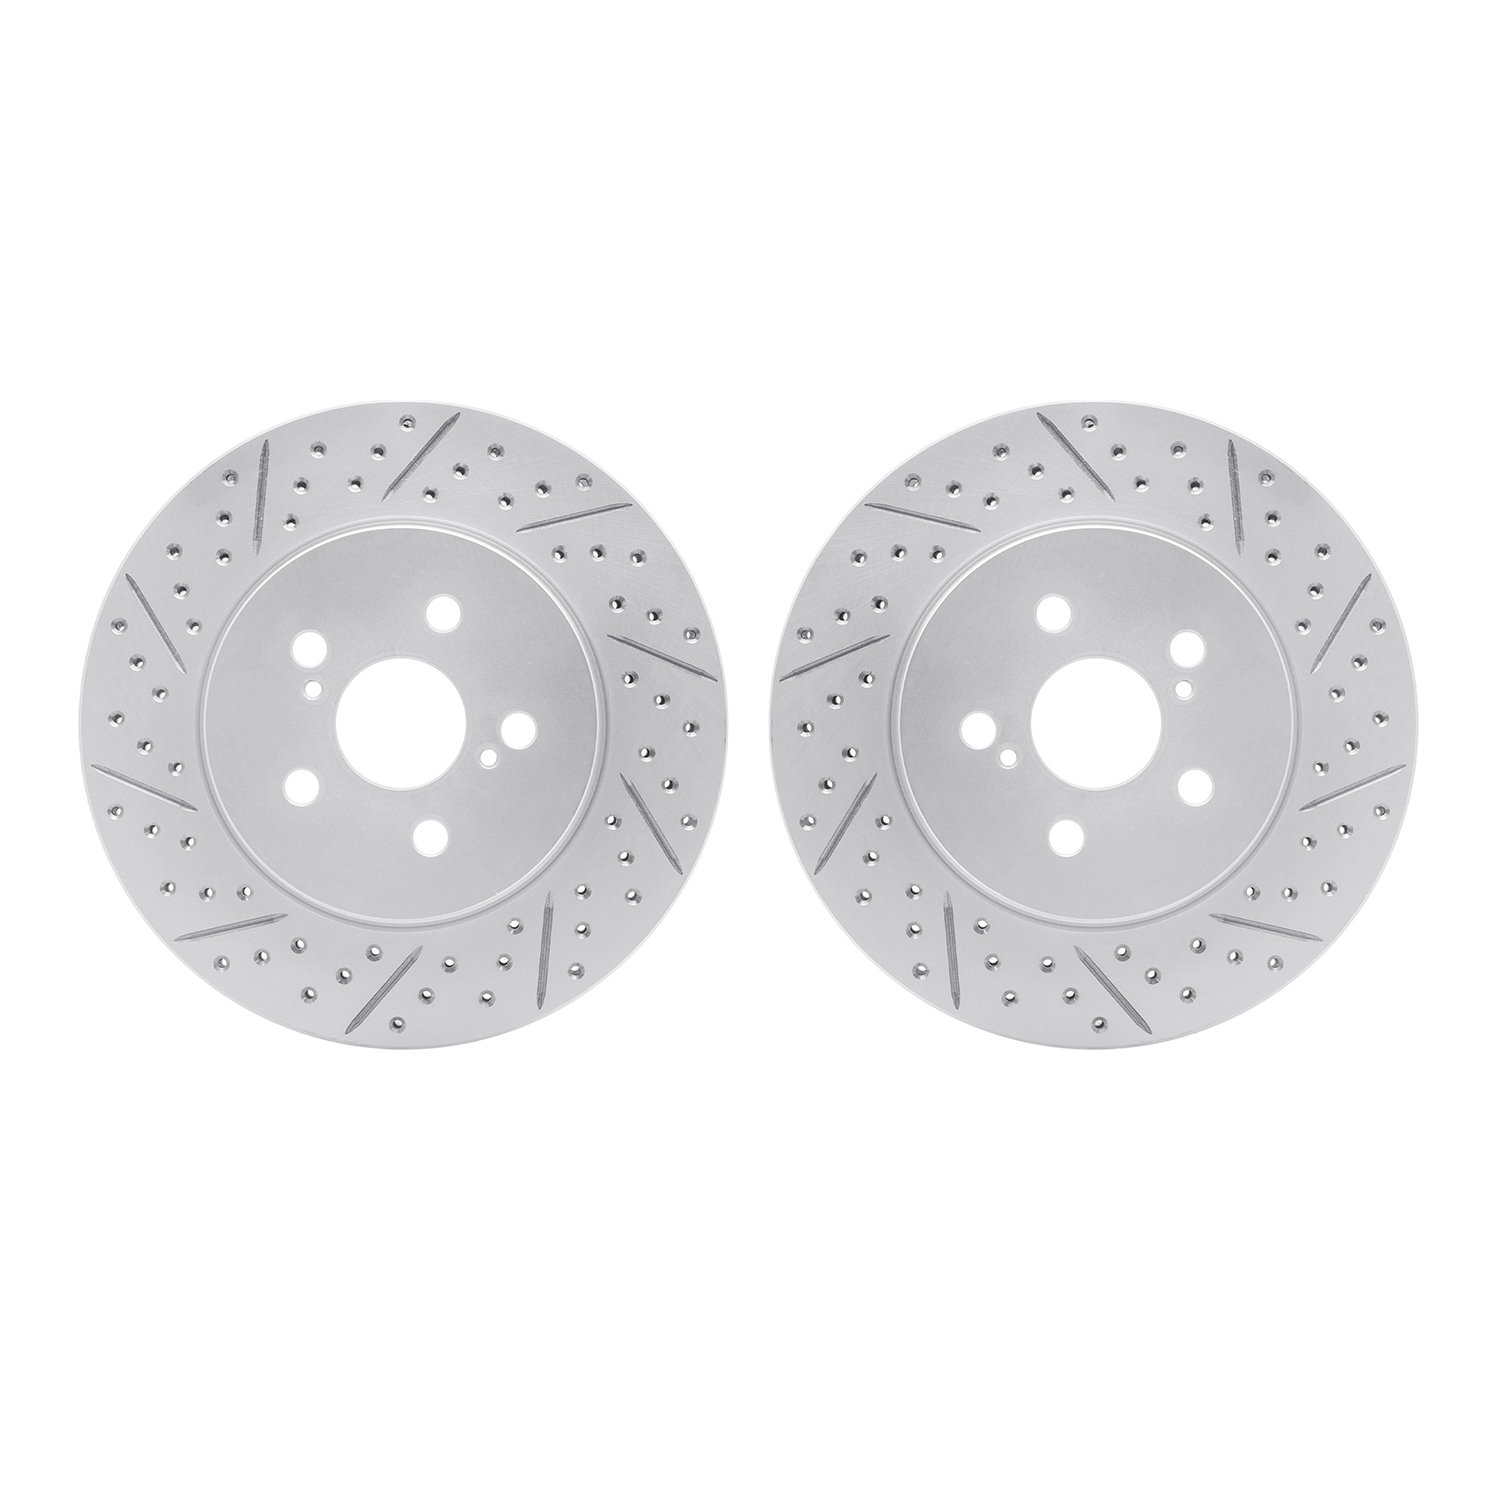 2002-76024 Geoperformance Drilled/Slotted Brake Rotors, Fits Select Lexus/Toyota/Scion, Position: Front